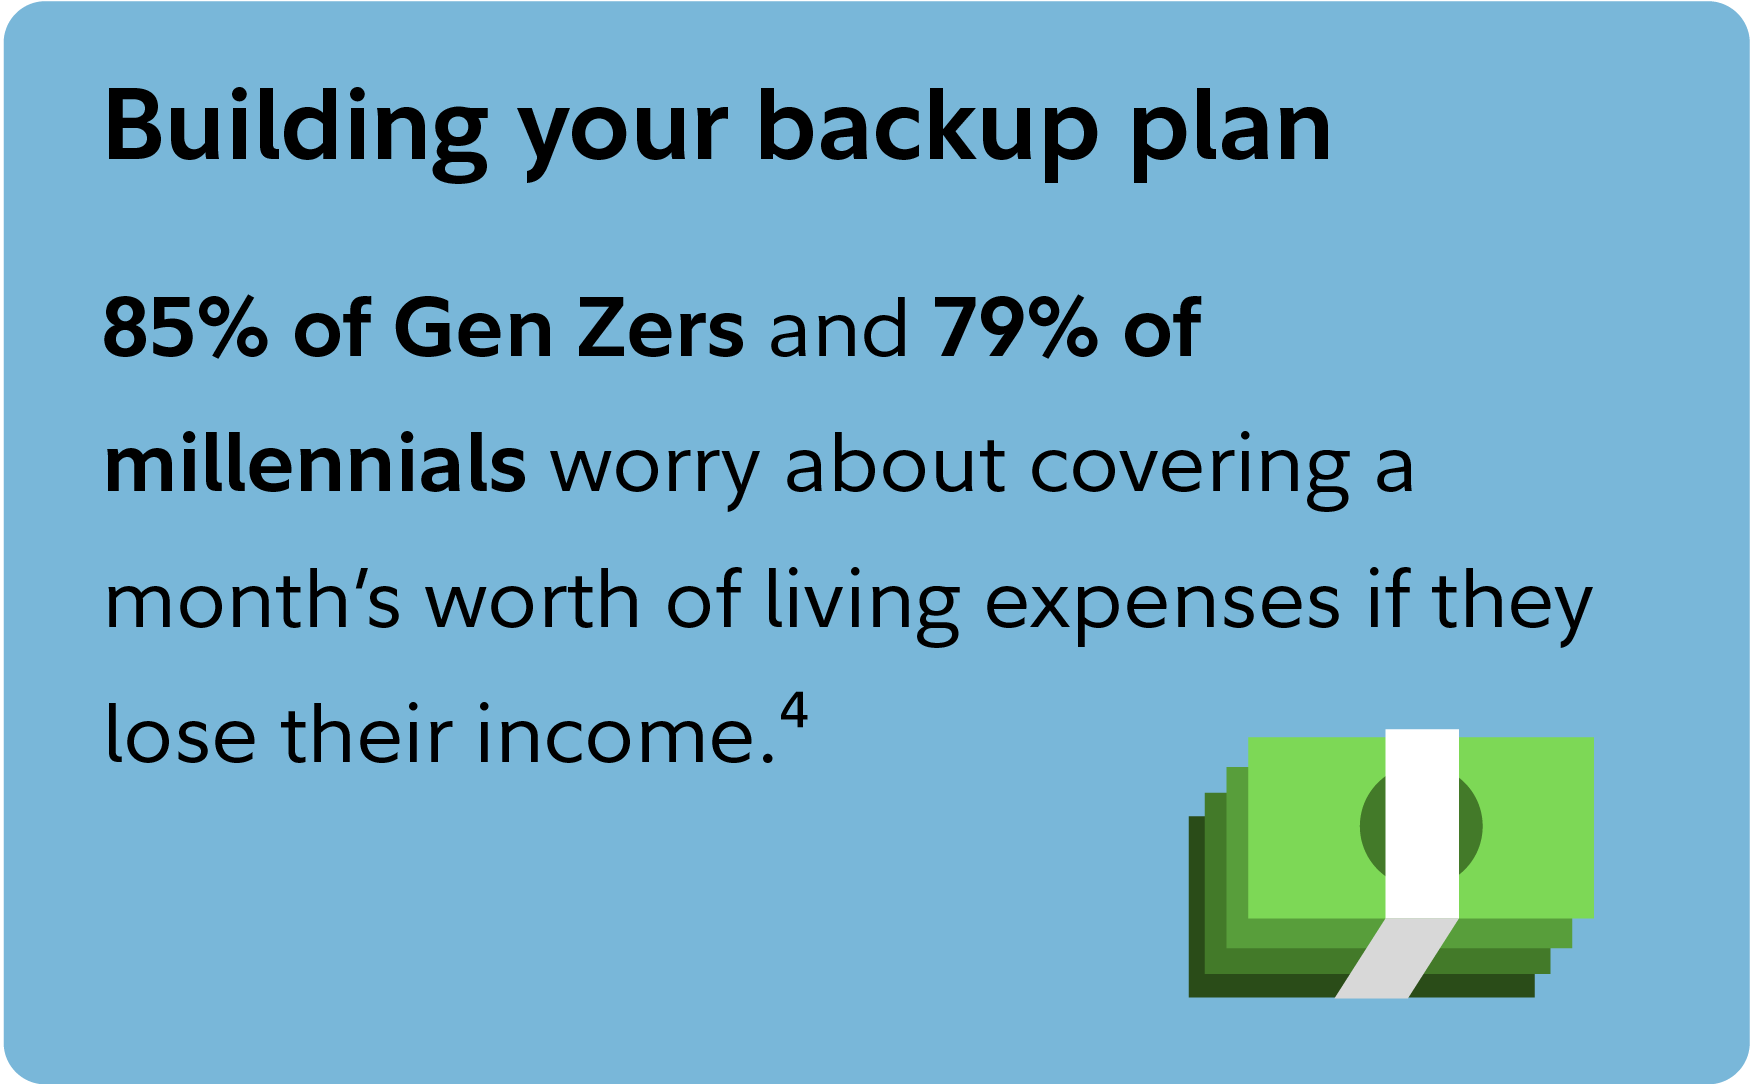 Building your backup plan 85% of Gen Zers and 79% of millennials say they would be worried about being able to cover a month’s worth of living expenses if they were to lose a primary source of income tomorrow. See footnote 4 in complementary region.